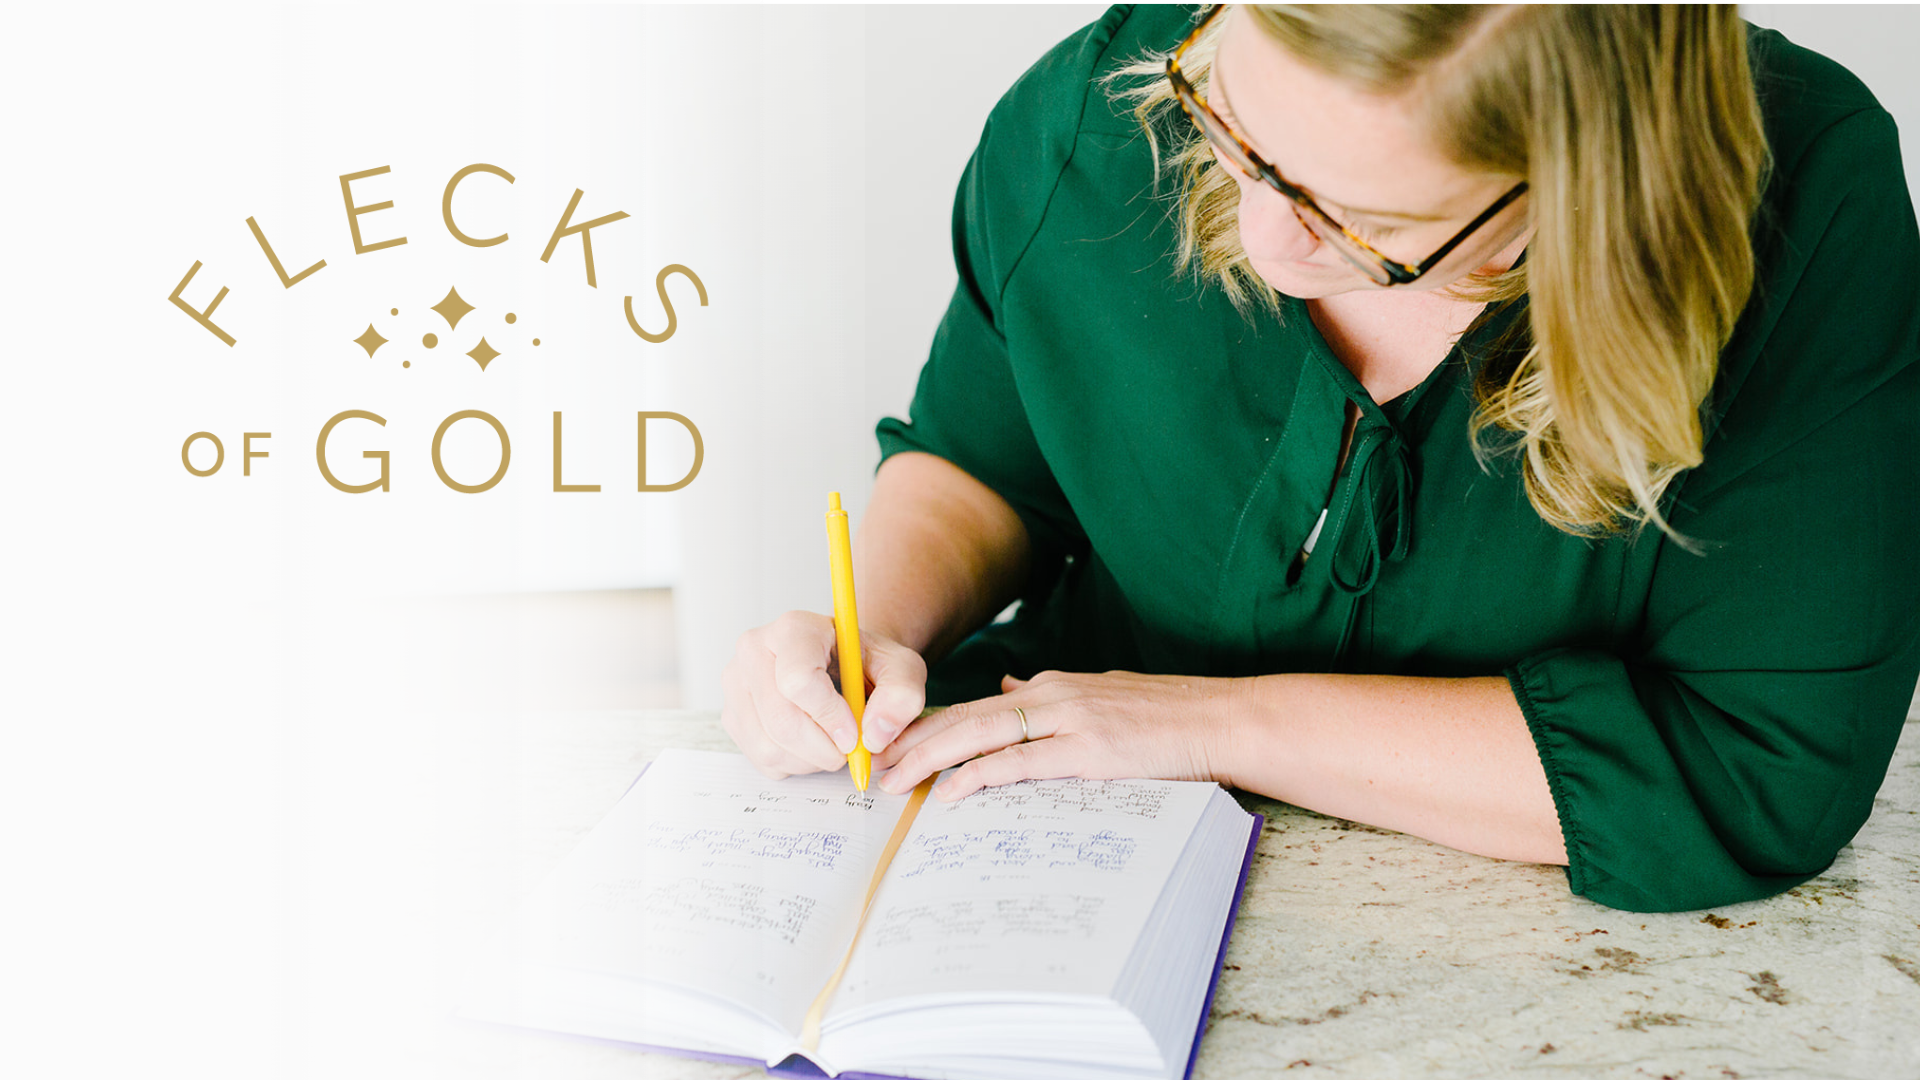 Rachel Nielson, host of the 3 in 30 Takeaways for Moms Podcast, writes in her Flecks of Gold Journal- a 3 year motherhood journal to help overwhelmed moms find the beauty, magic, and golden moments in their every-day.